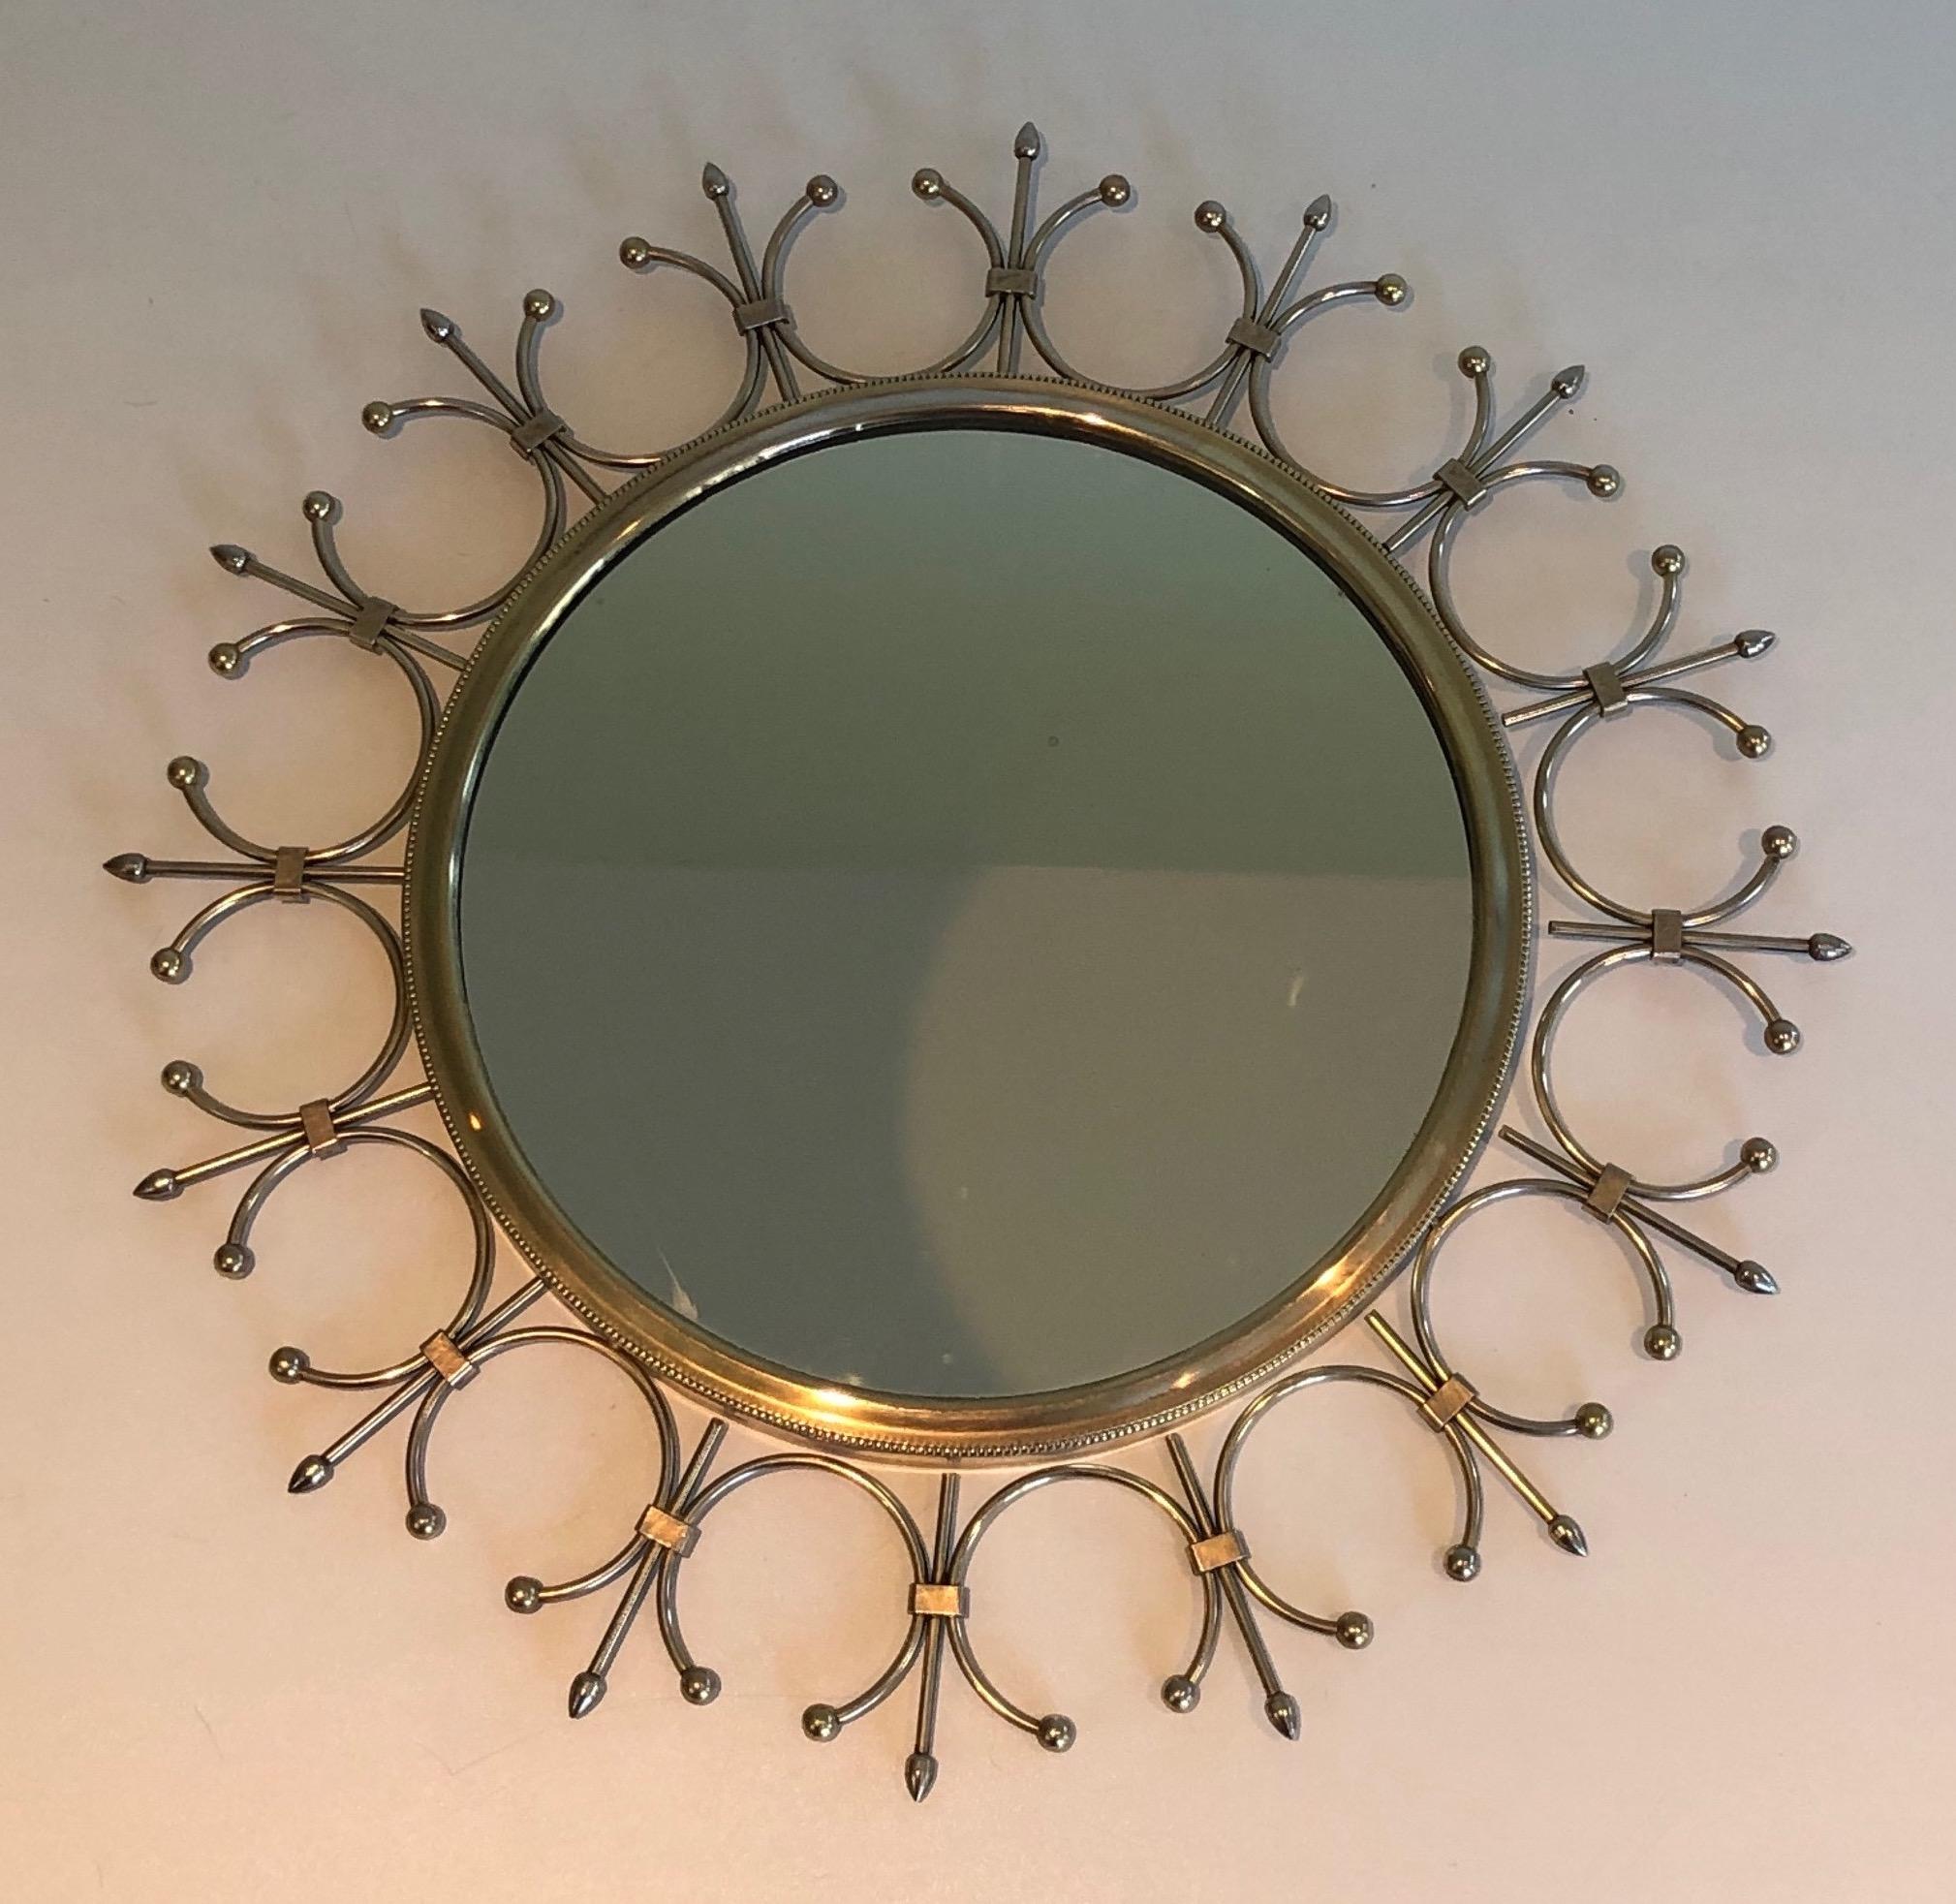 This delicate and decorative sunburst mirror is made of brass and brushed steel. This is a French work. Circa 1970.